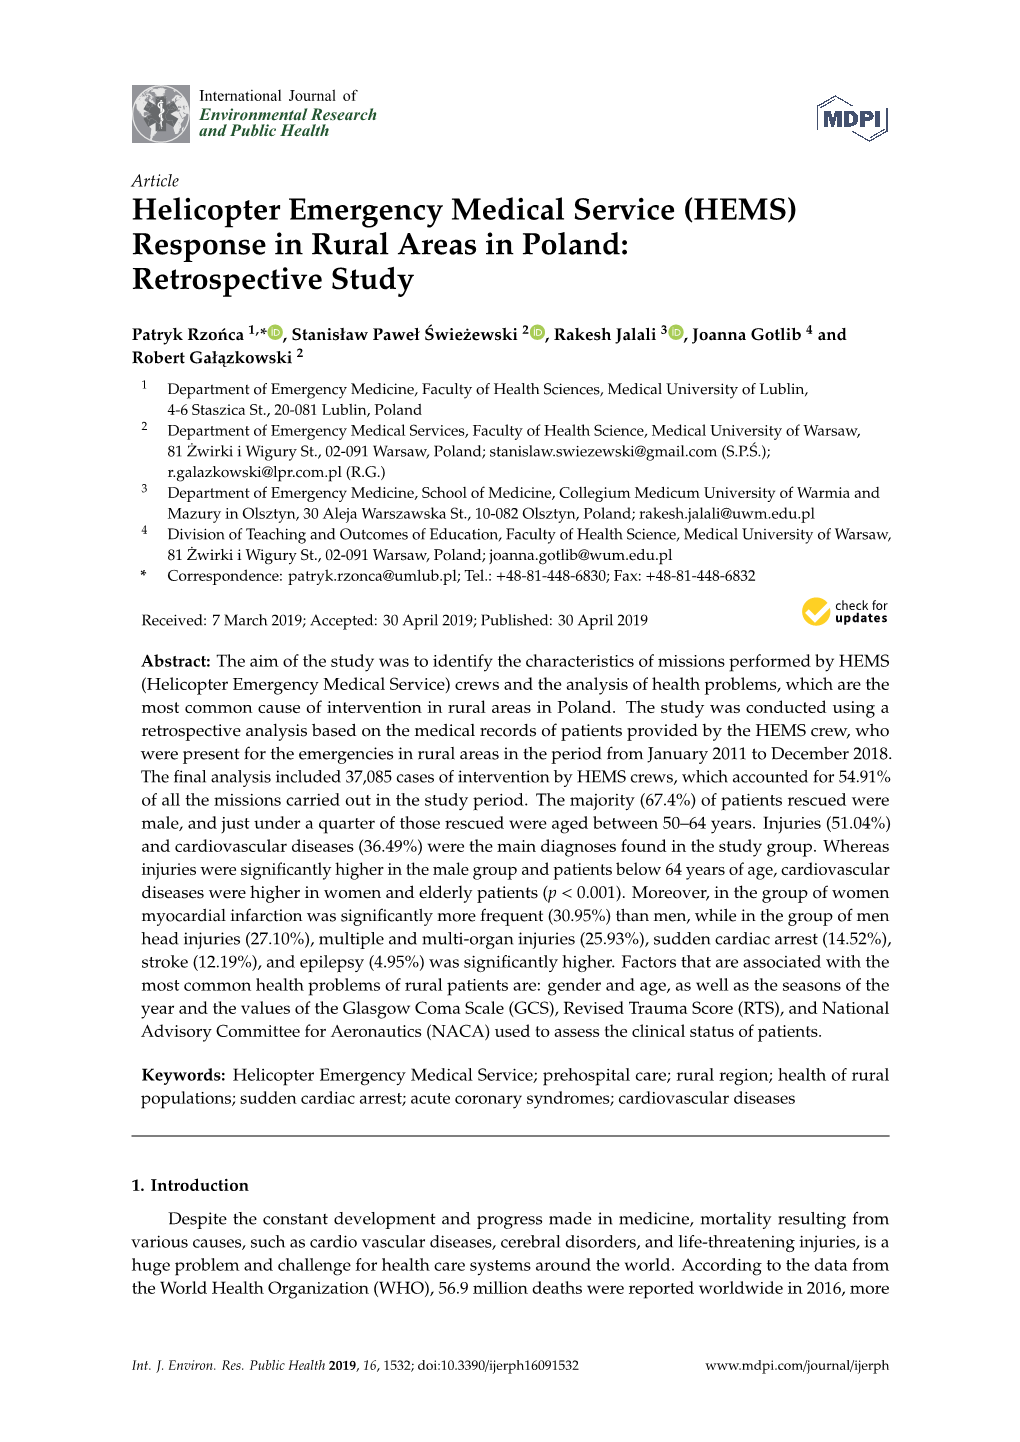 Helicopter Emergency Medical Service (HEMS) Response in Rural Areas in Poland: Retrospective Study